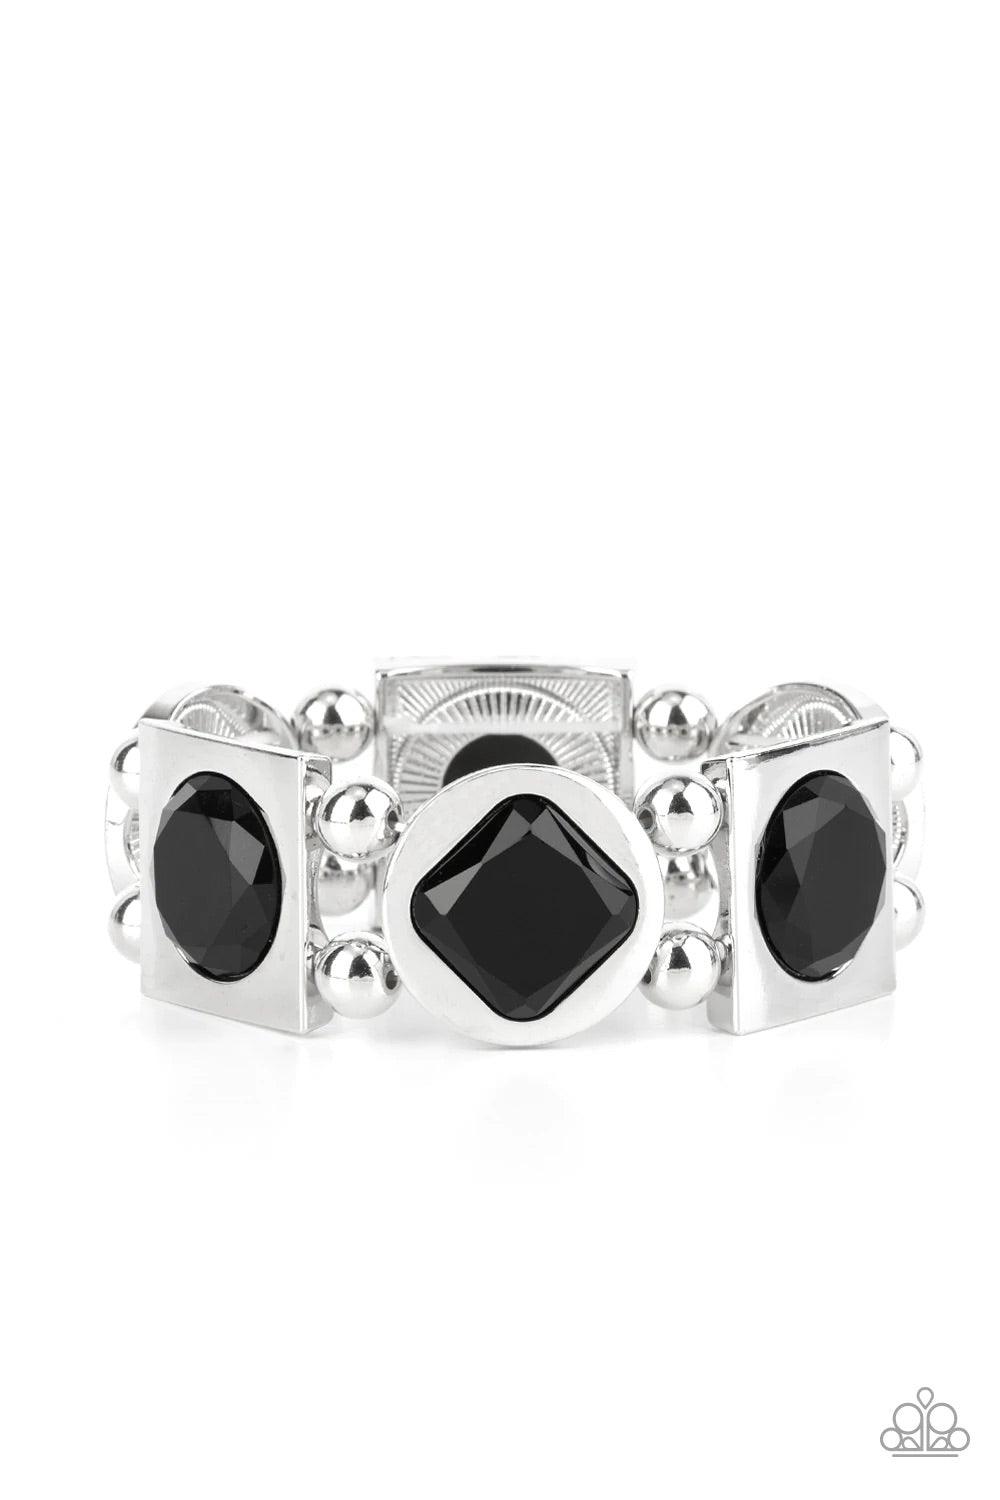 Paparazzi Accessories Asymmetrical A-Lister - Black Infused with pairs of silver beads, a faceted collection of round and square black gems are pressed into matching silver frames as they glide along stretchy bands around the wrist for a refined fashion.